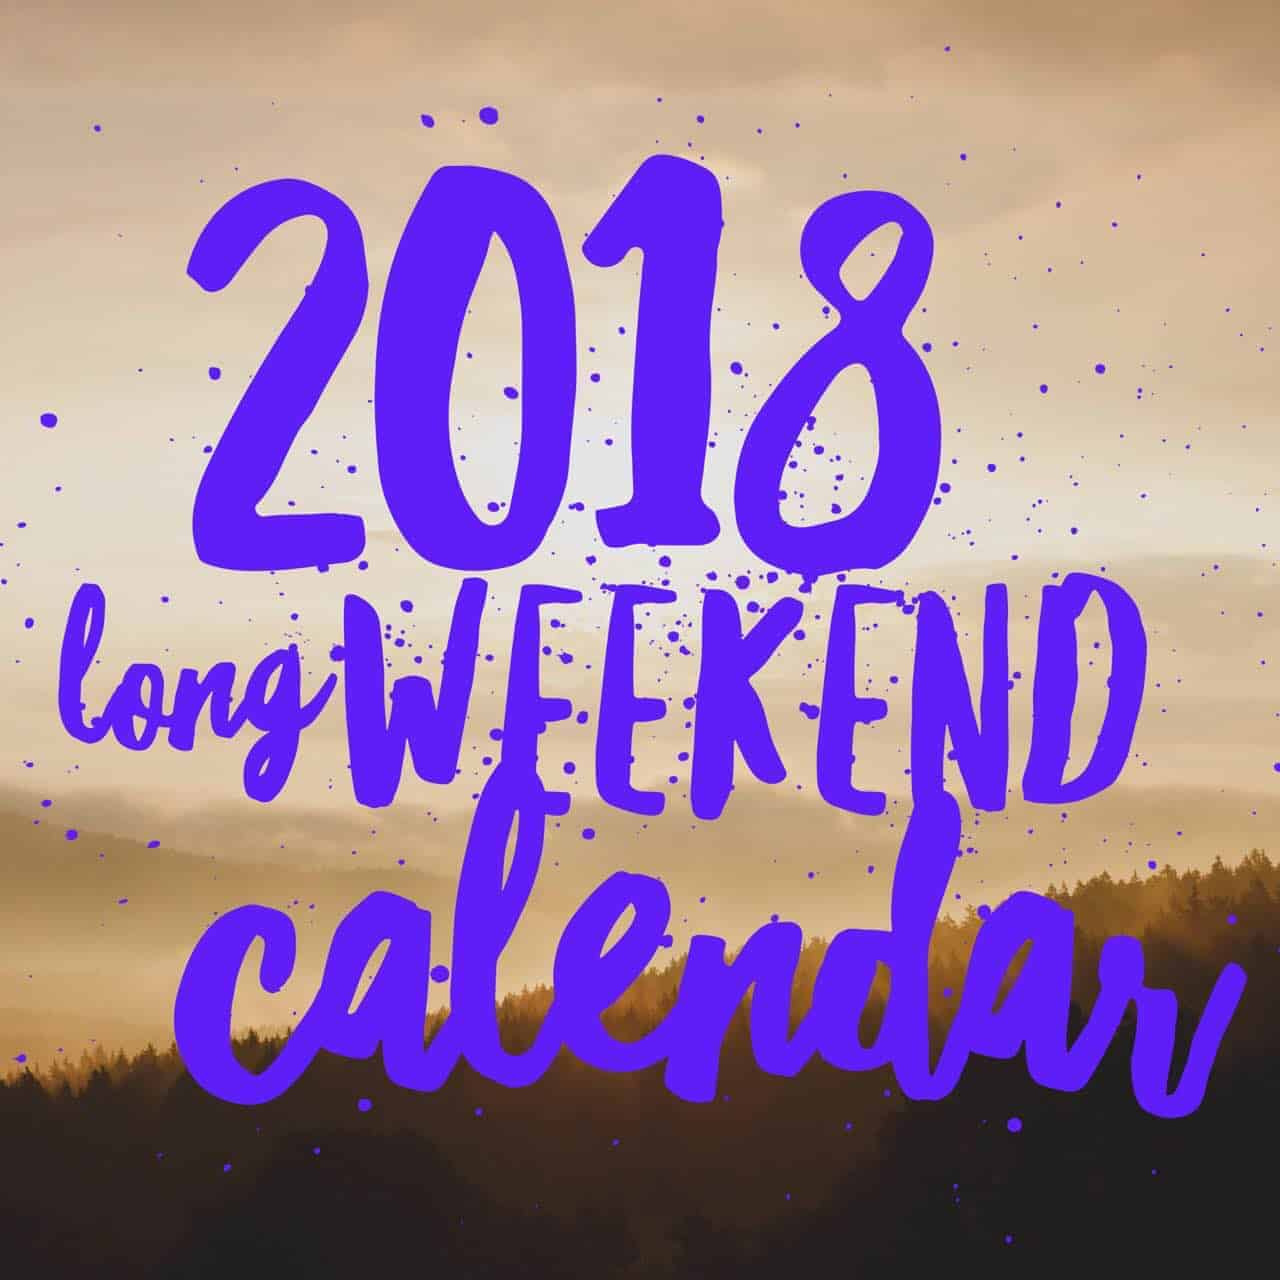 Plan your trips ahead with the 2018 long weekend calendar and list of holidays.